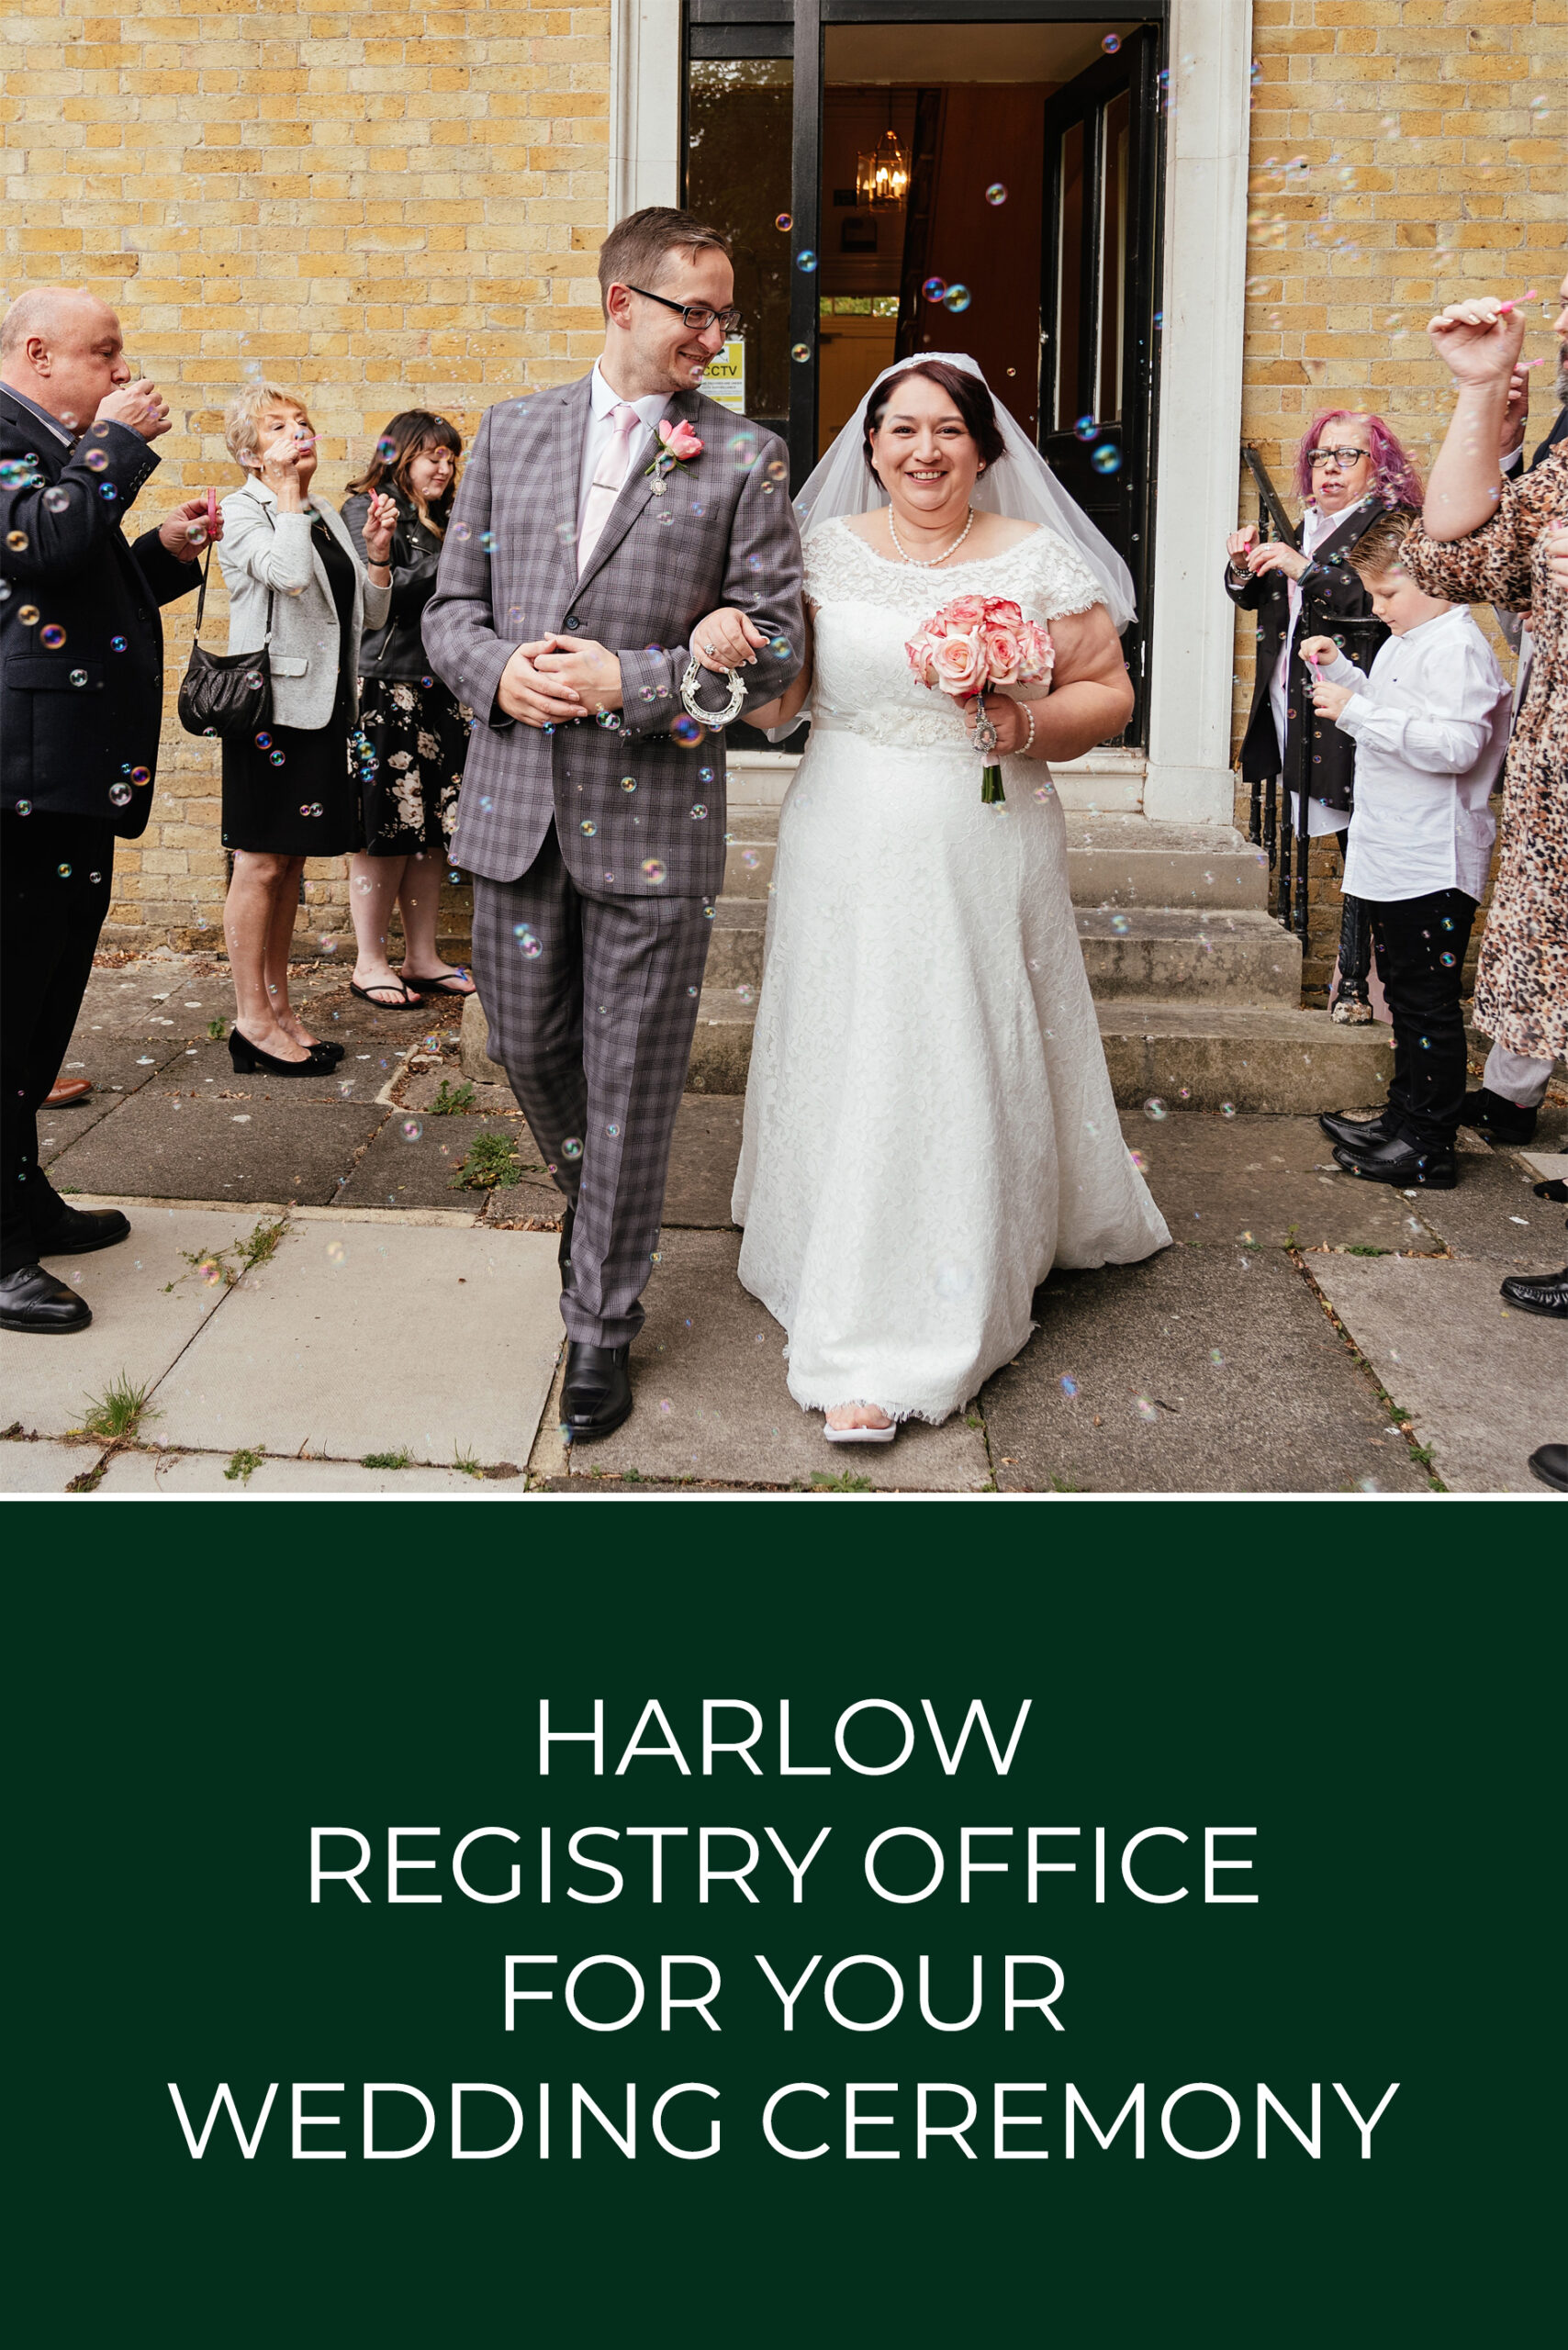 Harlow Registry Office for your Wedding ceremony